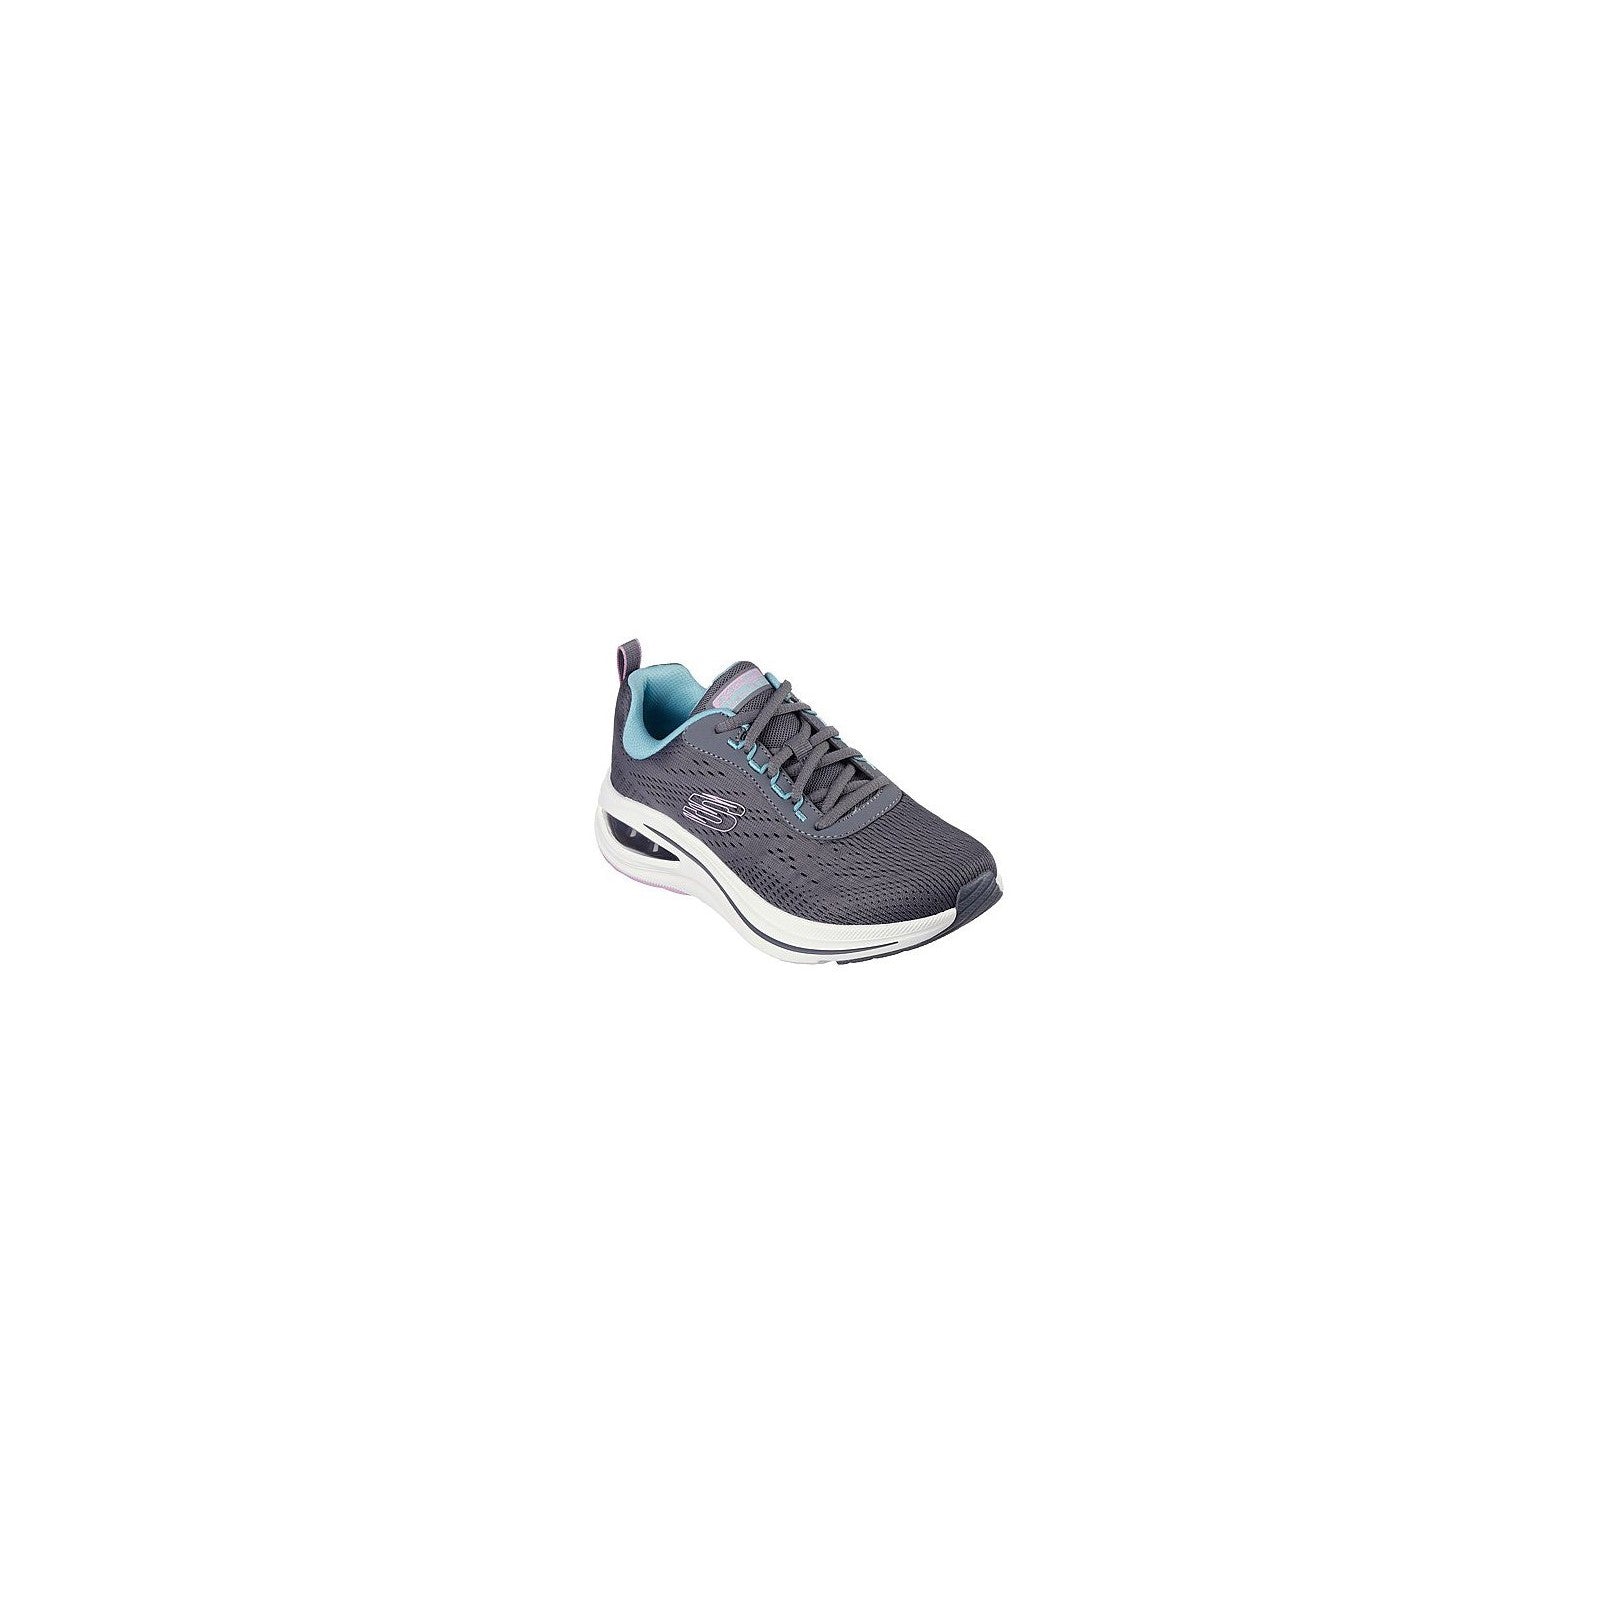 Skechers Skech-Air Meta - Aired Out Trainer